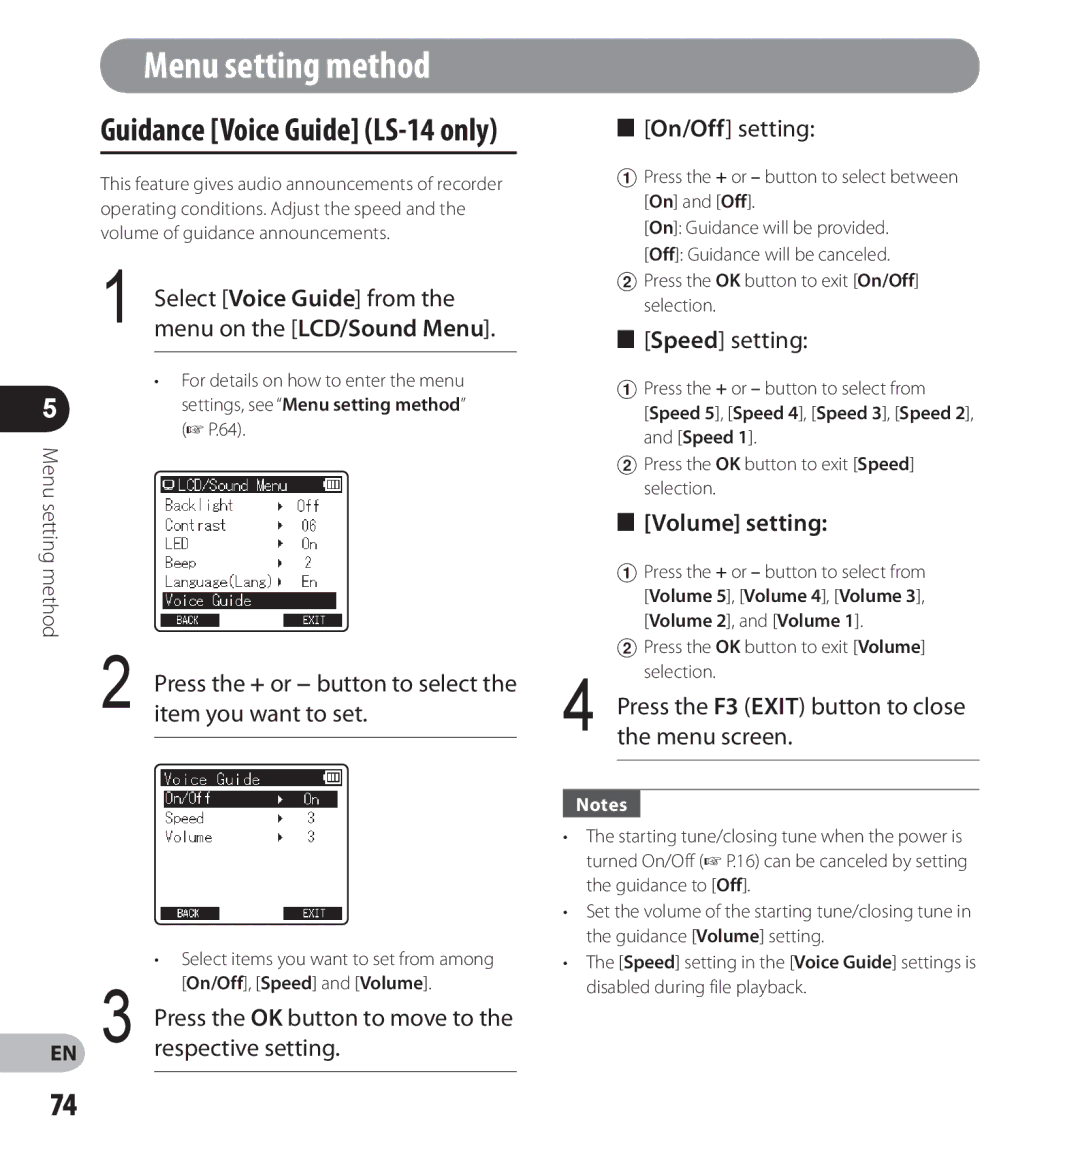 Olympus Guidance Voice Guide LS-14 only, Press the + or − button to select the item you want to set, Speed setting 